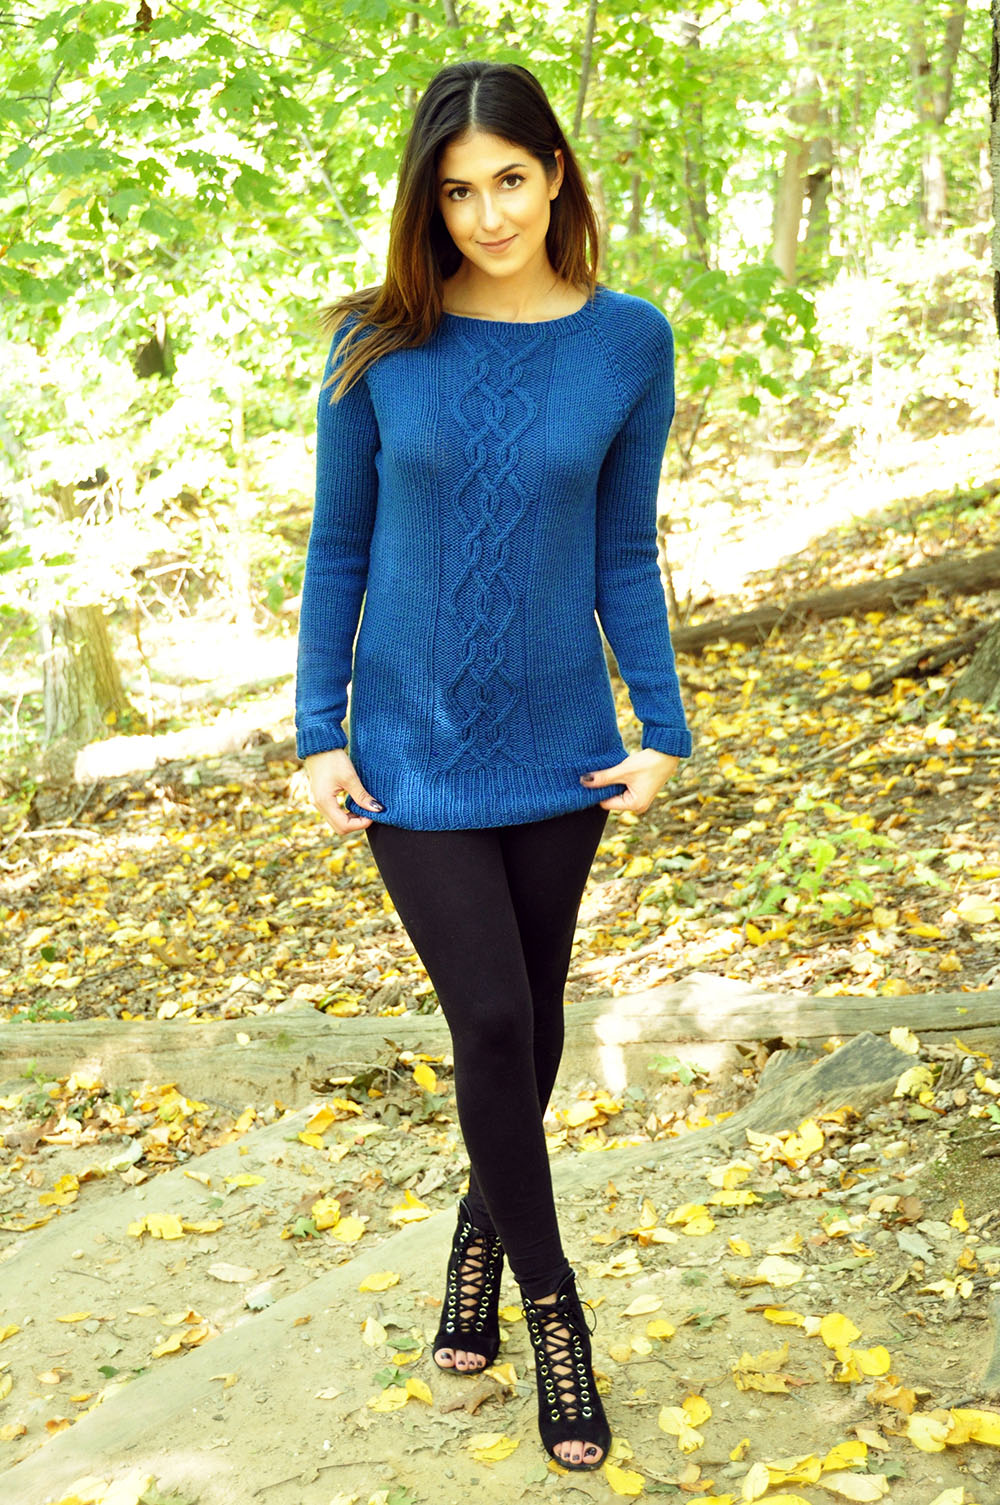 “Sweater Weather” Raglan Cable Knit Dress